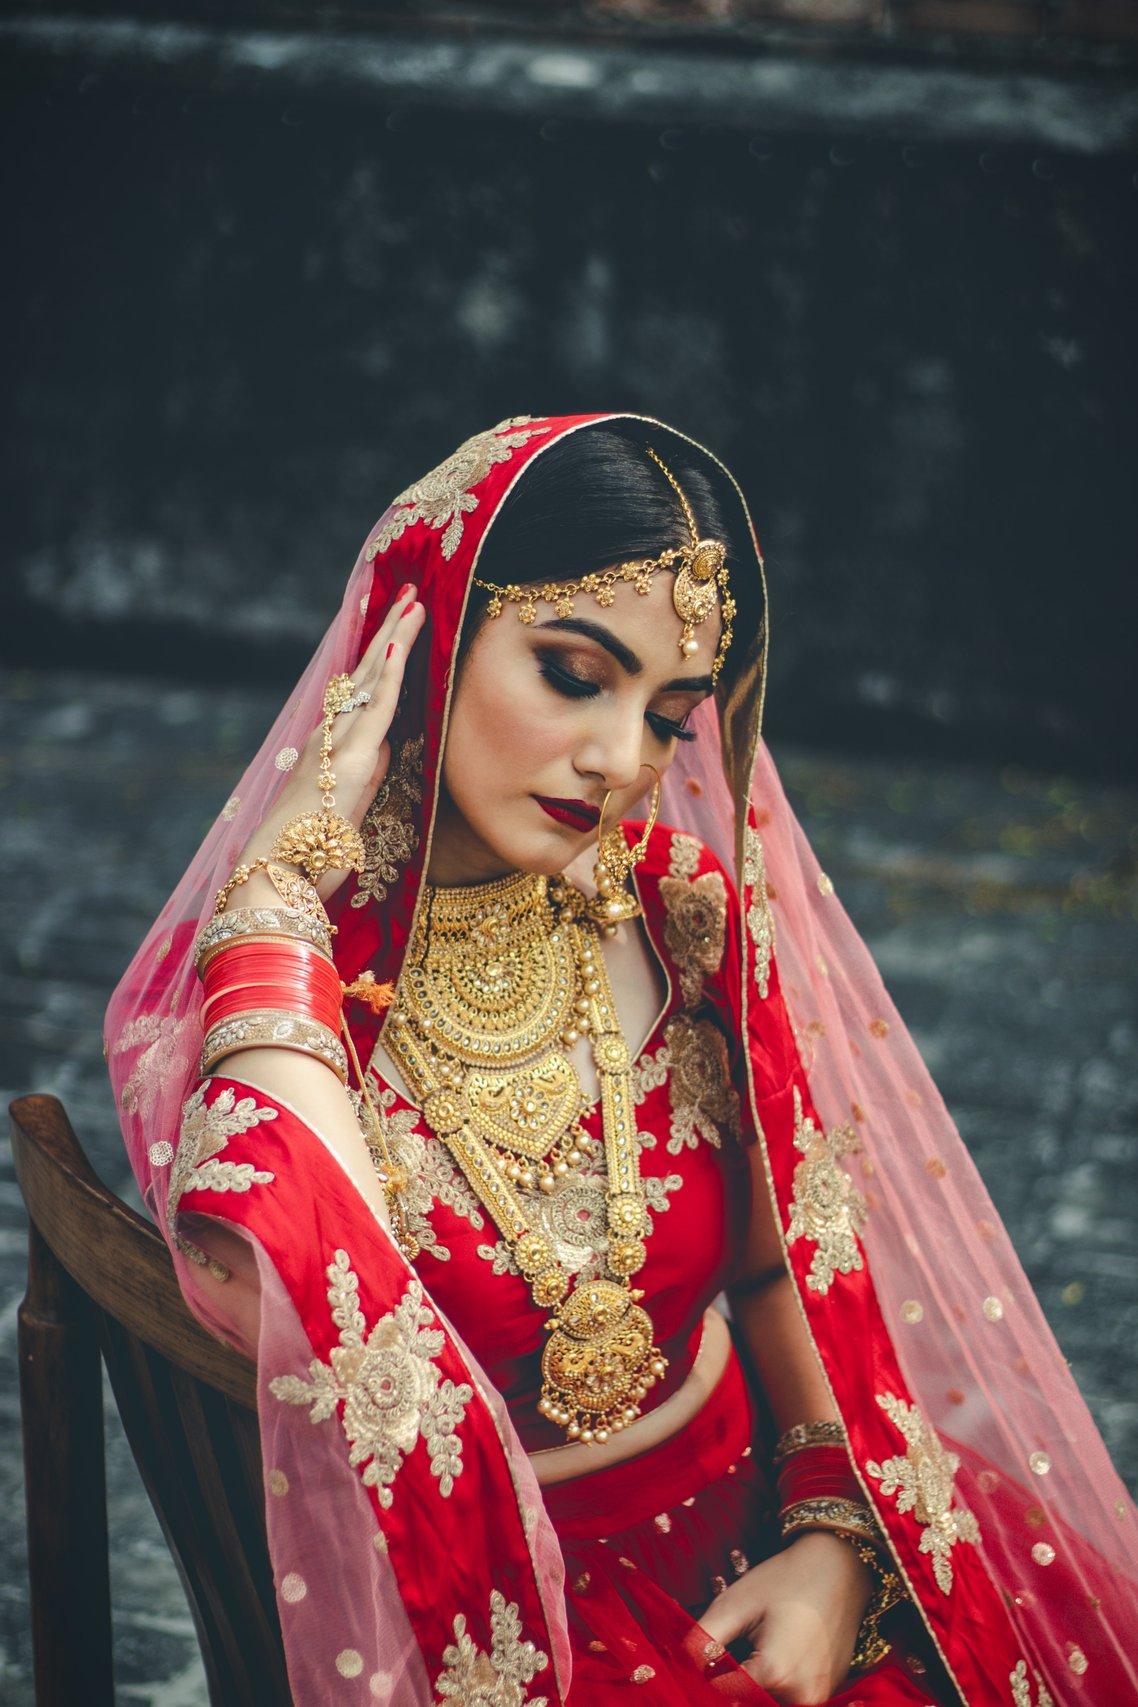 What to Expect at a Hindu Wedding: Traditions & Etiquette